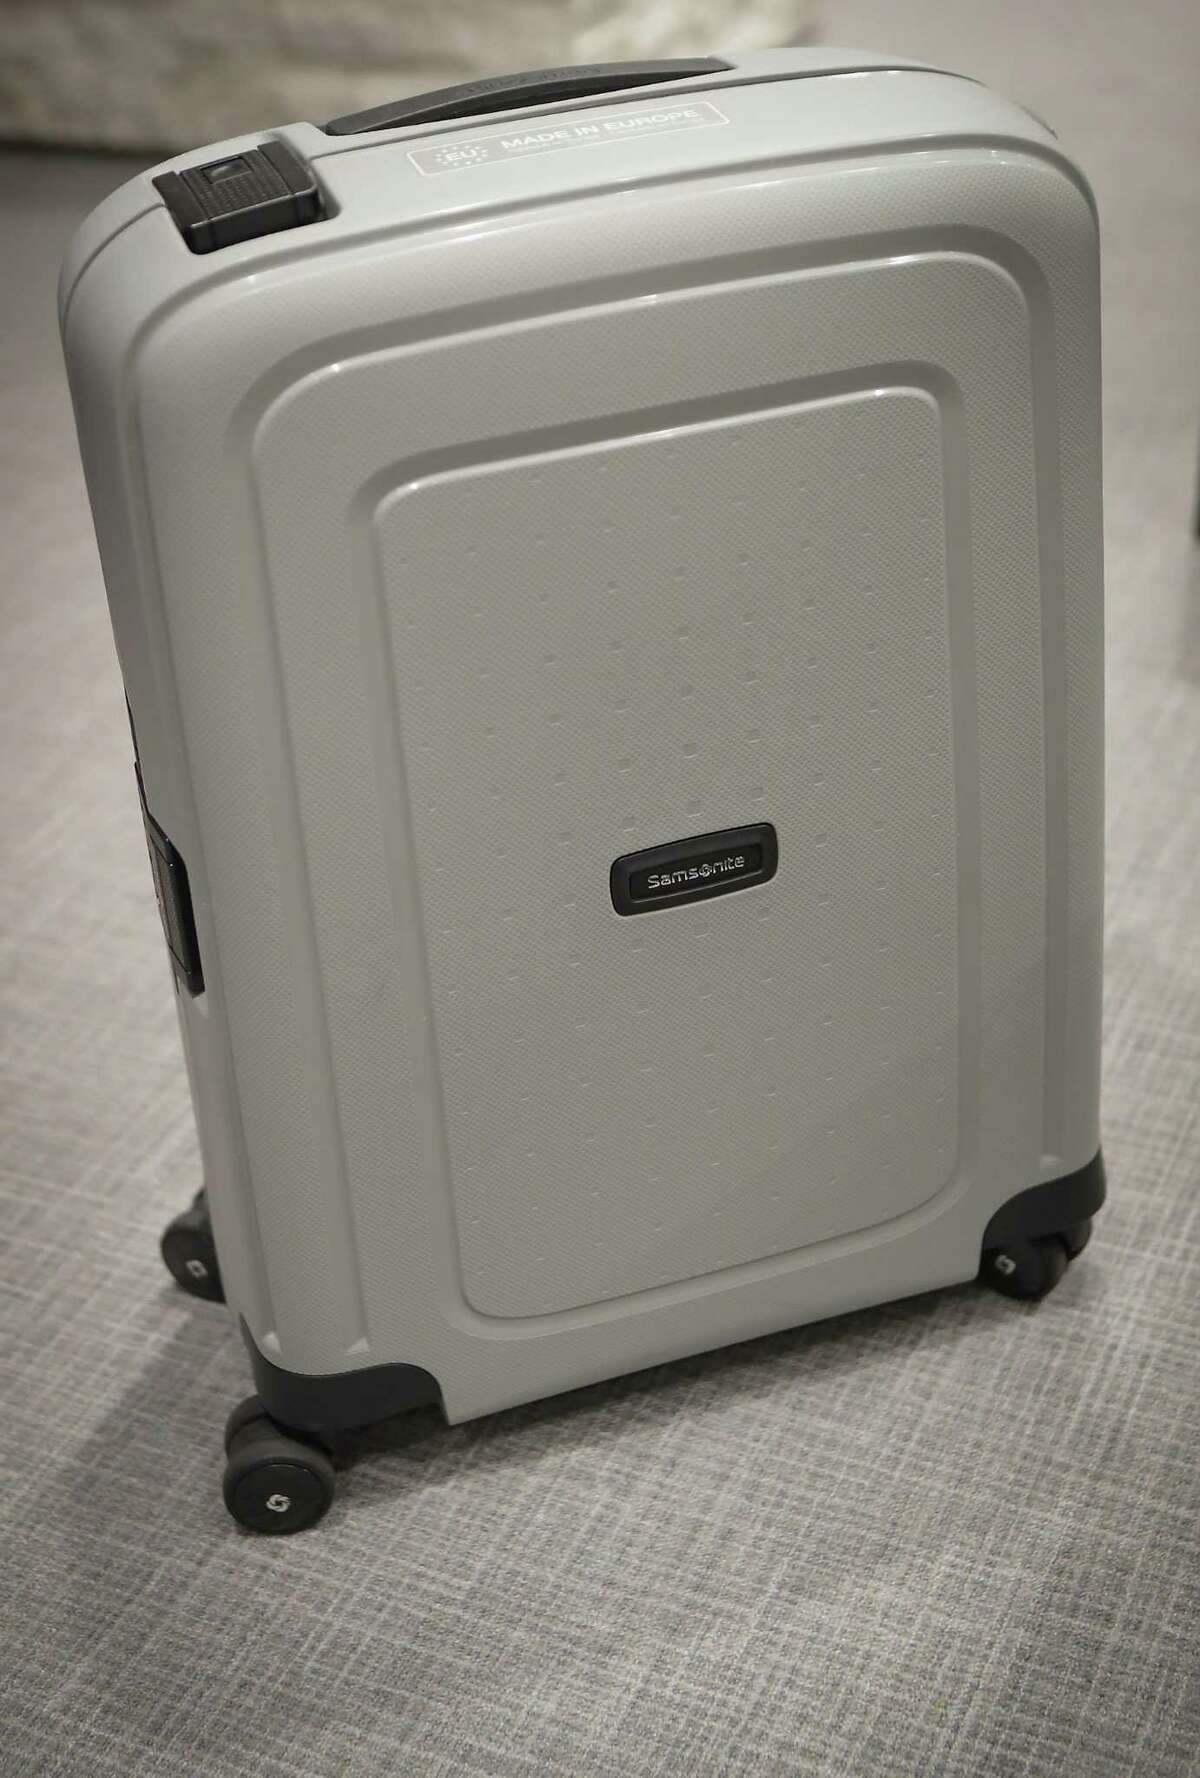 A Samsonite luggage made from recycled plastics is shown by Bob Patel, CEO of LyondellBasell chemical industry company Thursday, June 3, 2021, in Houston.